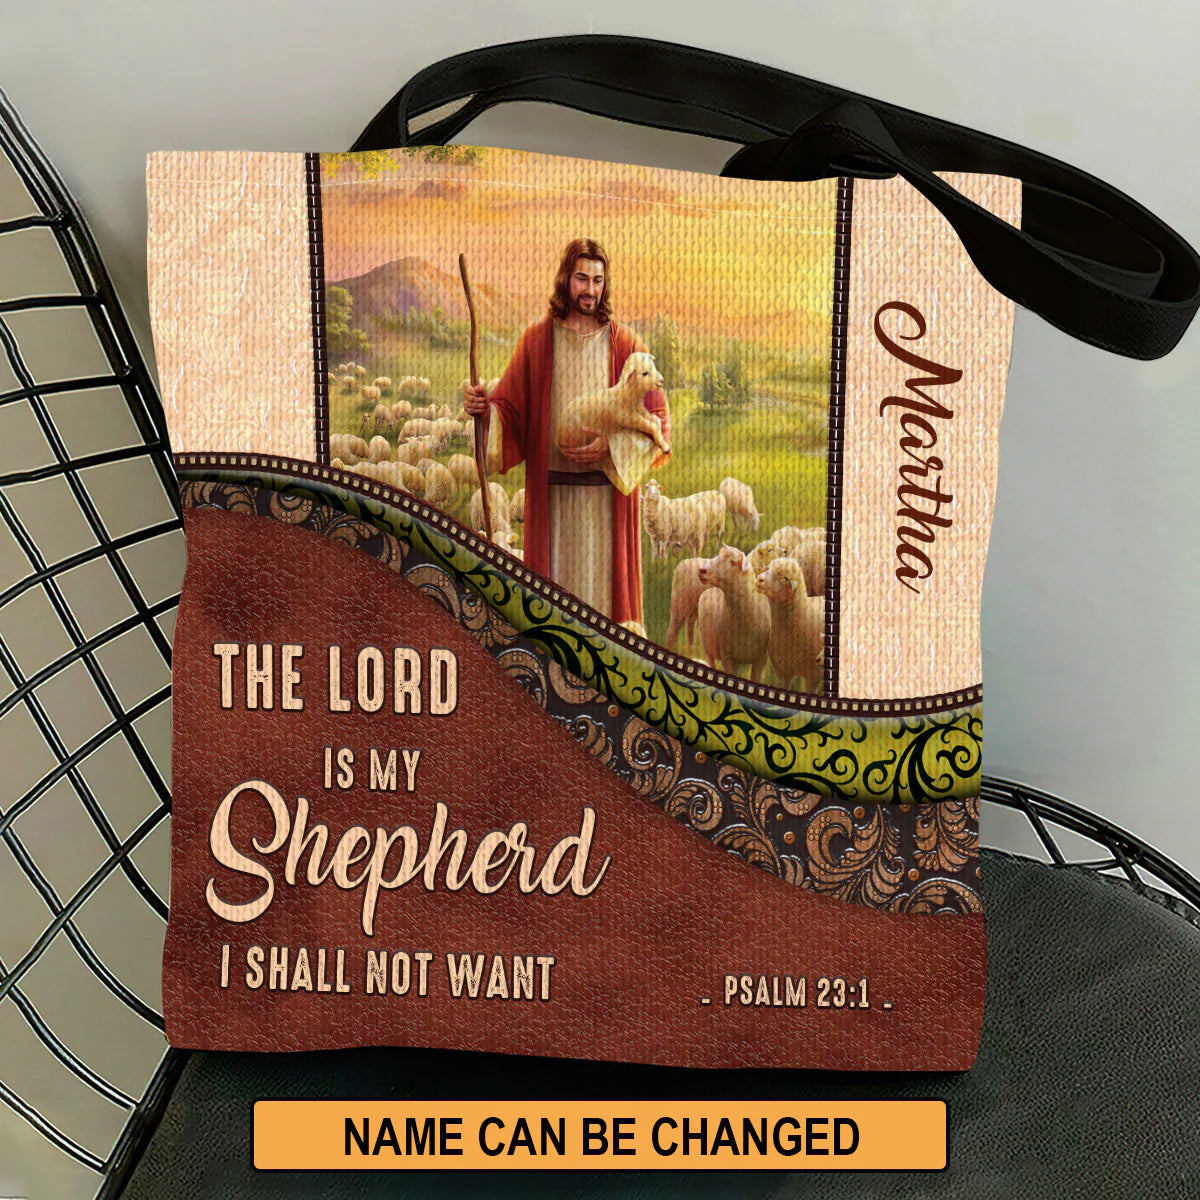 Christianart Designer Handbags, The Lord Is My Shepherd PSALM 23:1, Personalized Gifts, Gifts for Women. - Christian Art Bag